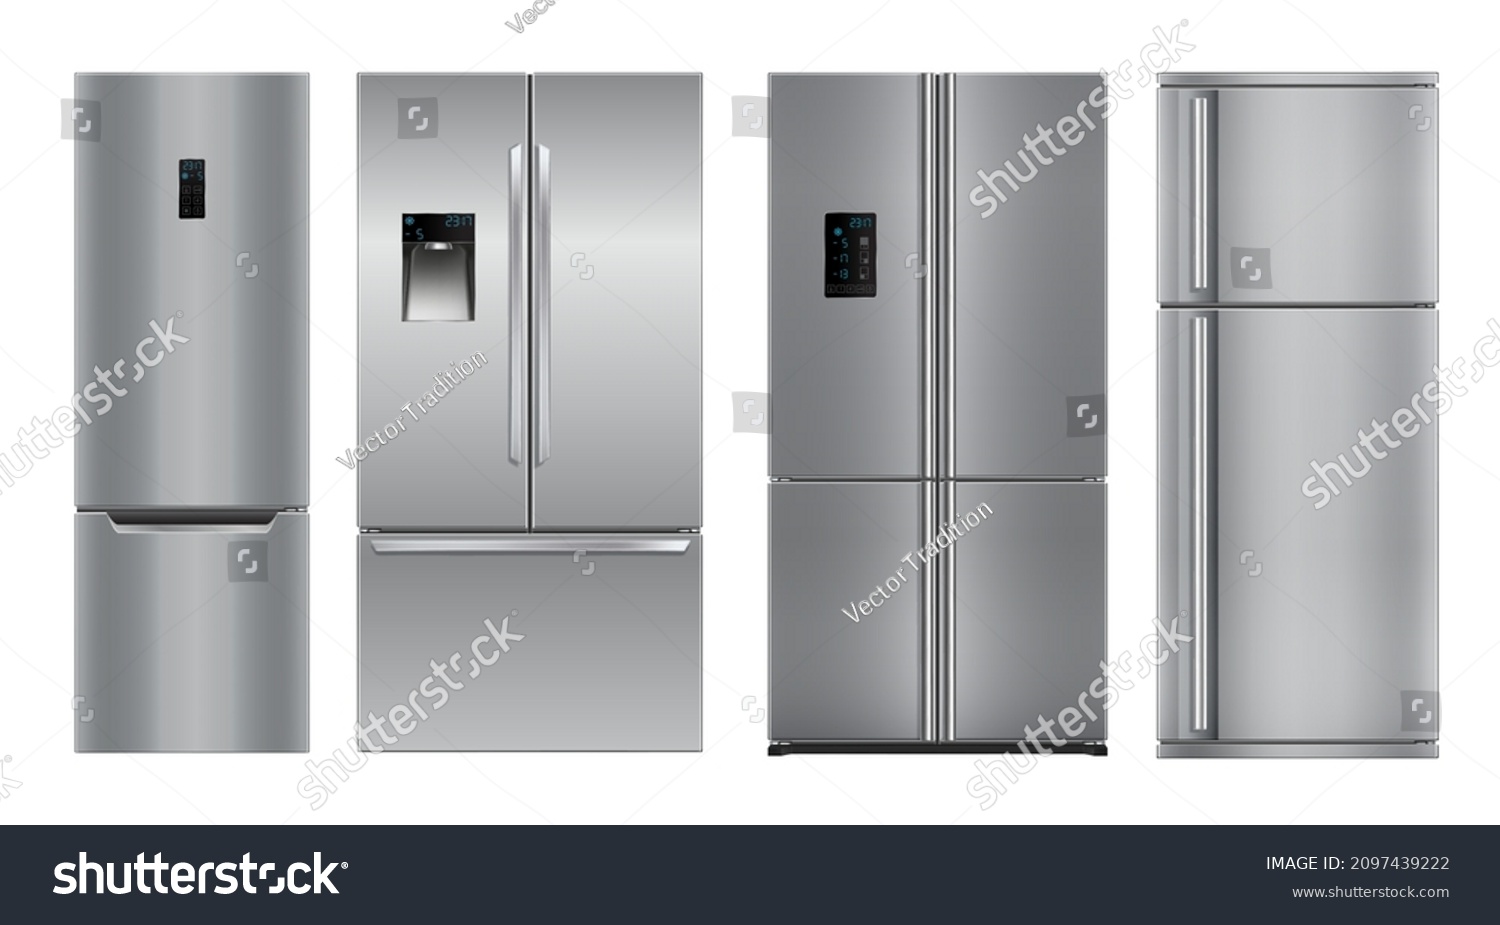 SVG of Realistic modern kitchen refrigerators, isolated fridge machine, freezer. Vector kitchen 3d appliance with digital display and dispenser for water, gray colored metal devices front view svg